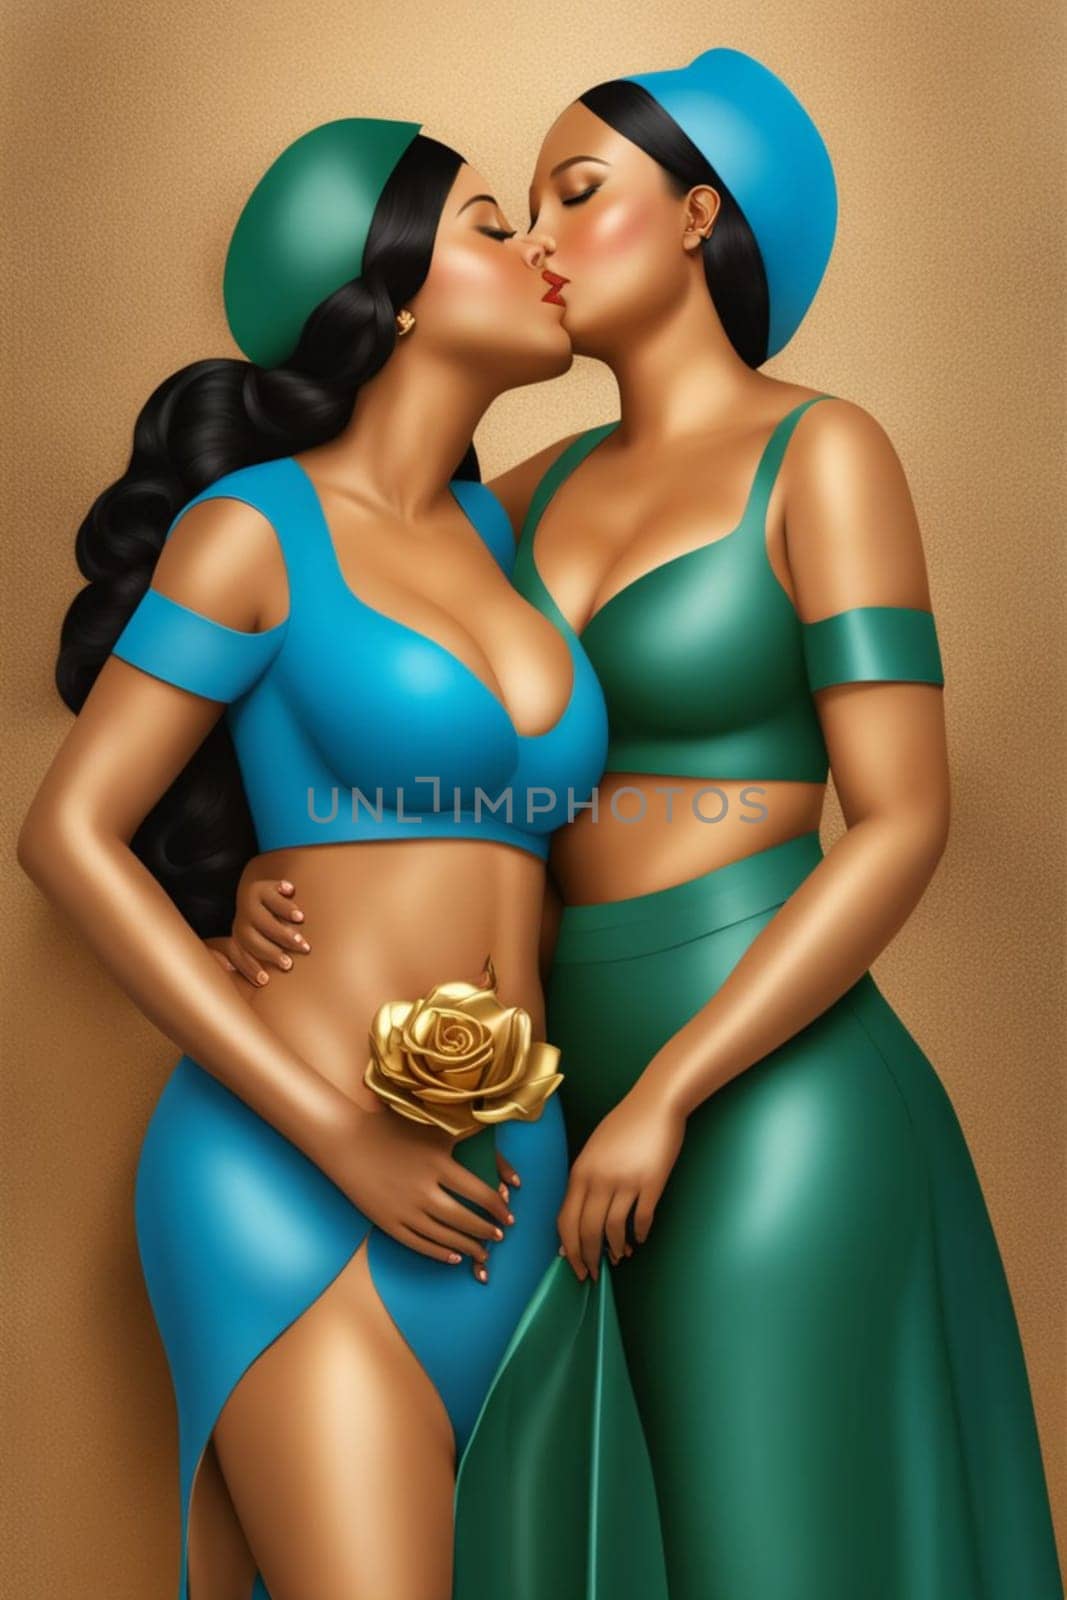 fashion portrait of couple modern empowered women illustration , blue, copper and pastel tones by verbano